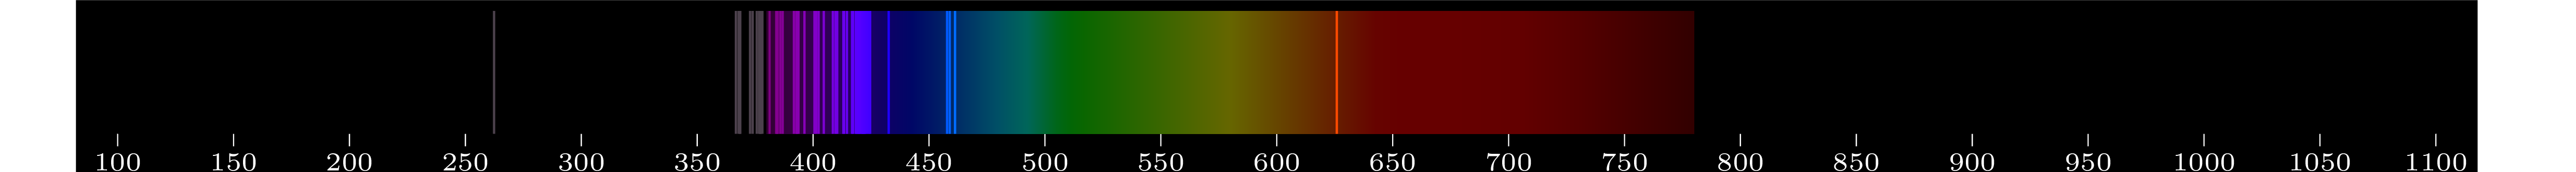 emmision spectra of element Dy